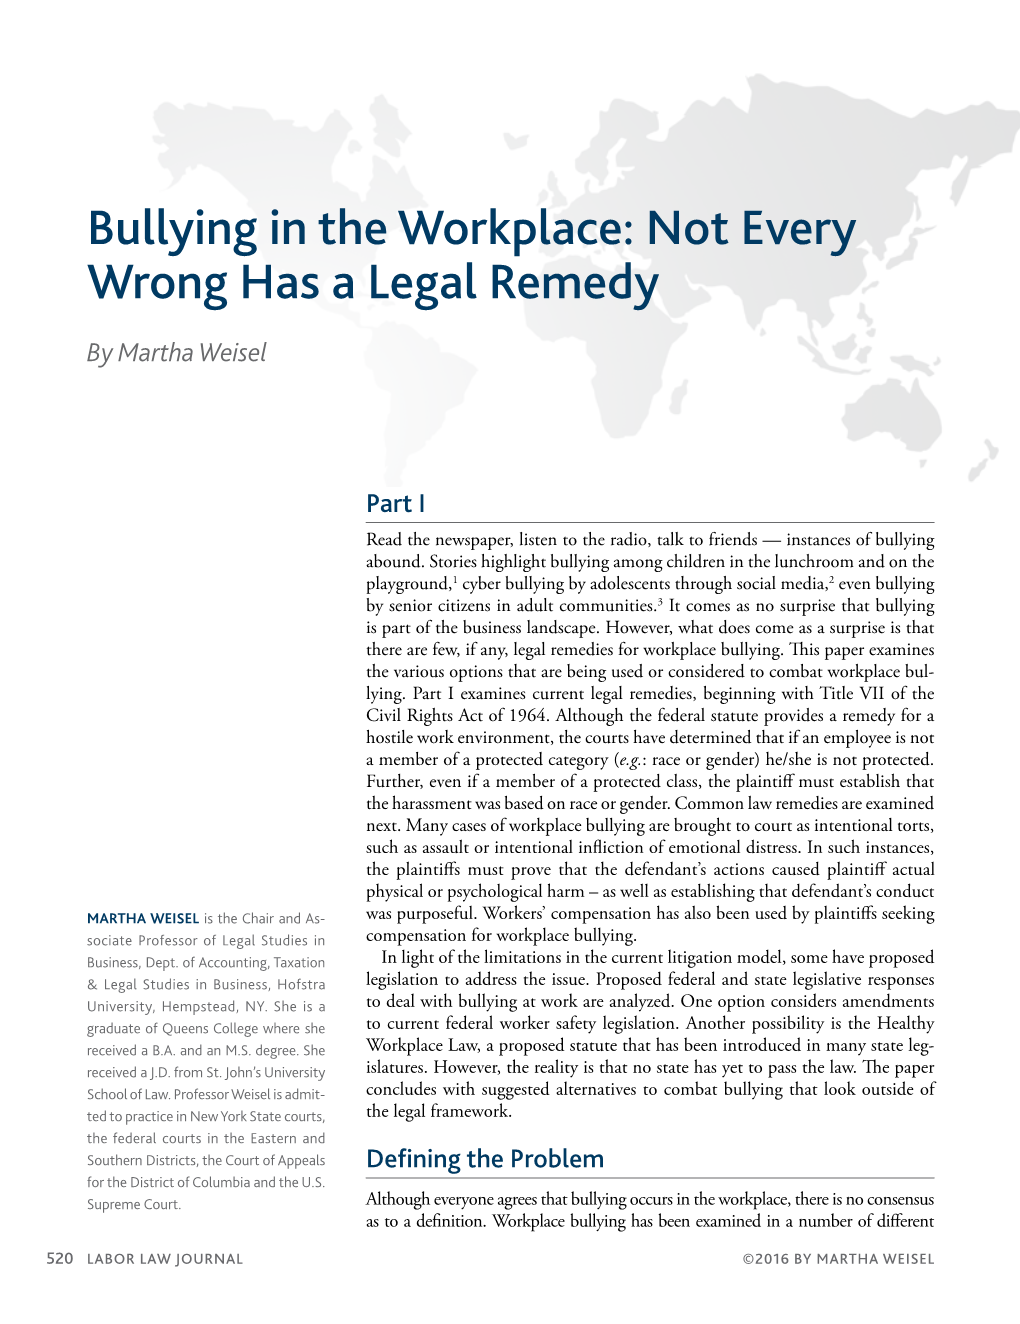 Bullying in the Workplace: Not Every Wrong Has a Legal Remedy